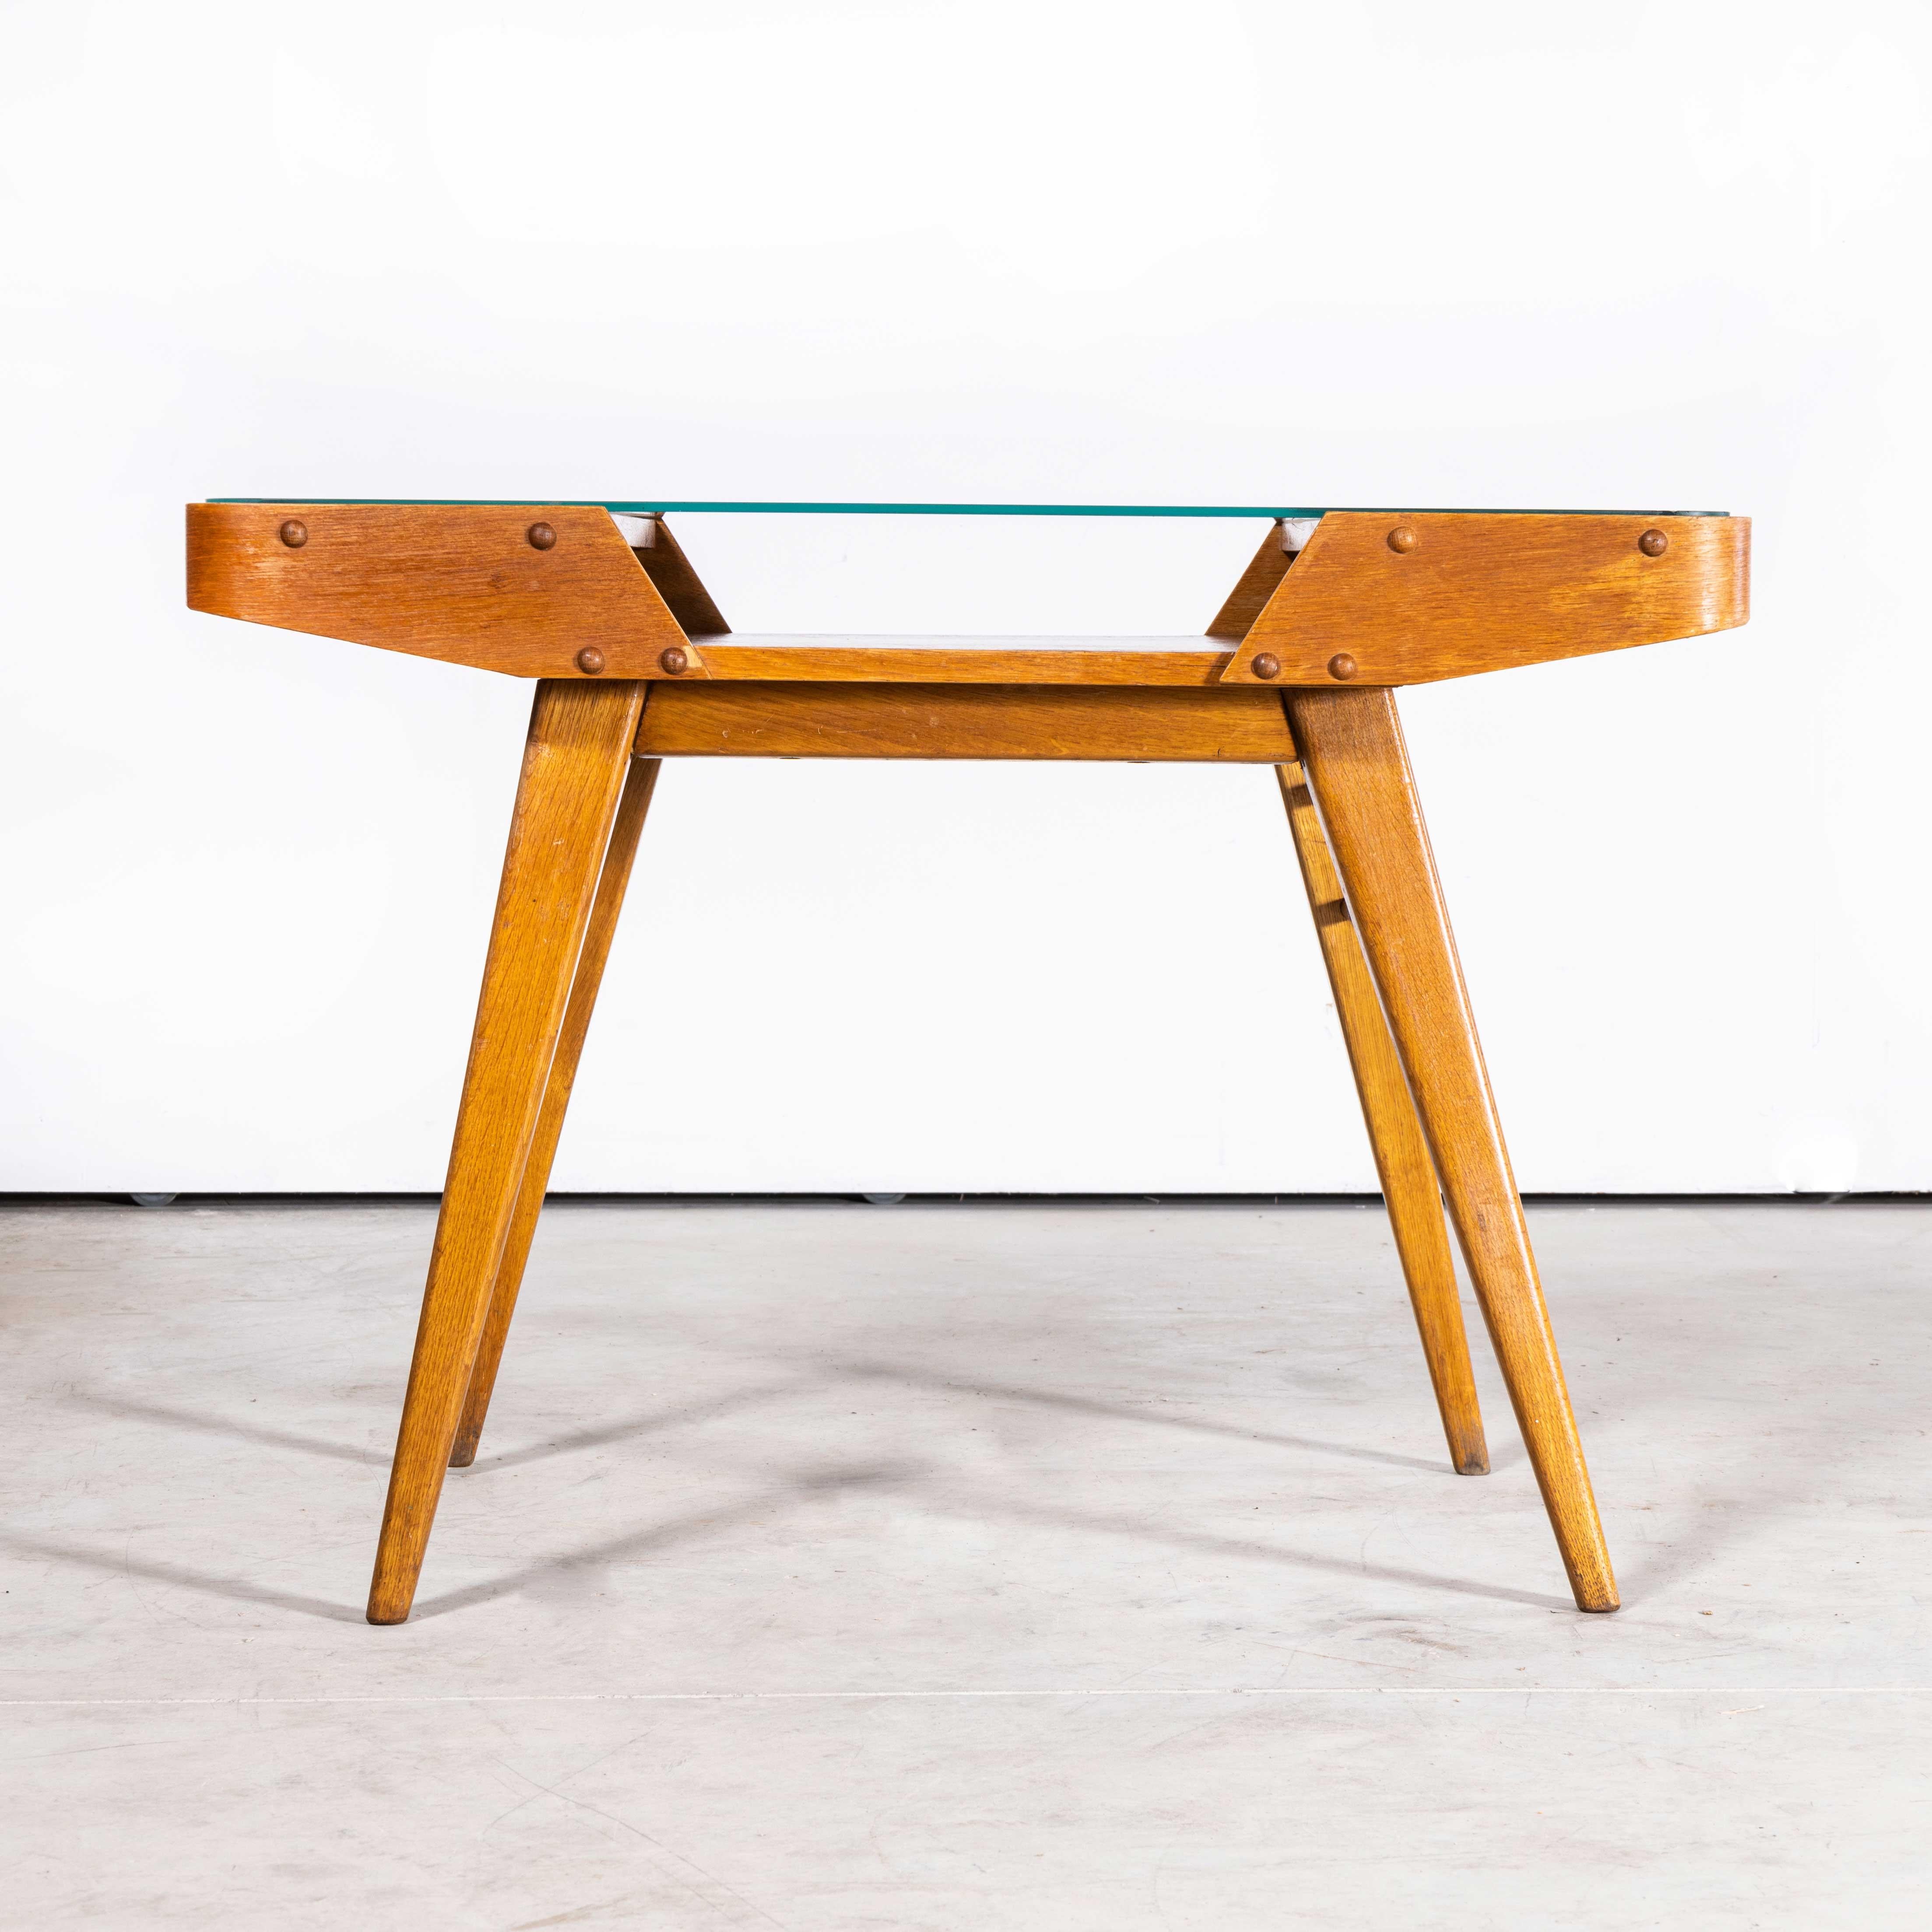 Czech 1950s Oak Framed Side Table with Glass Top For Sale